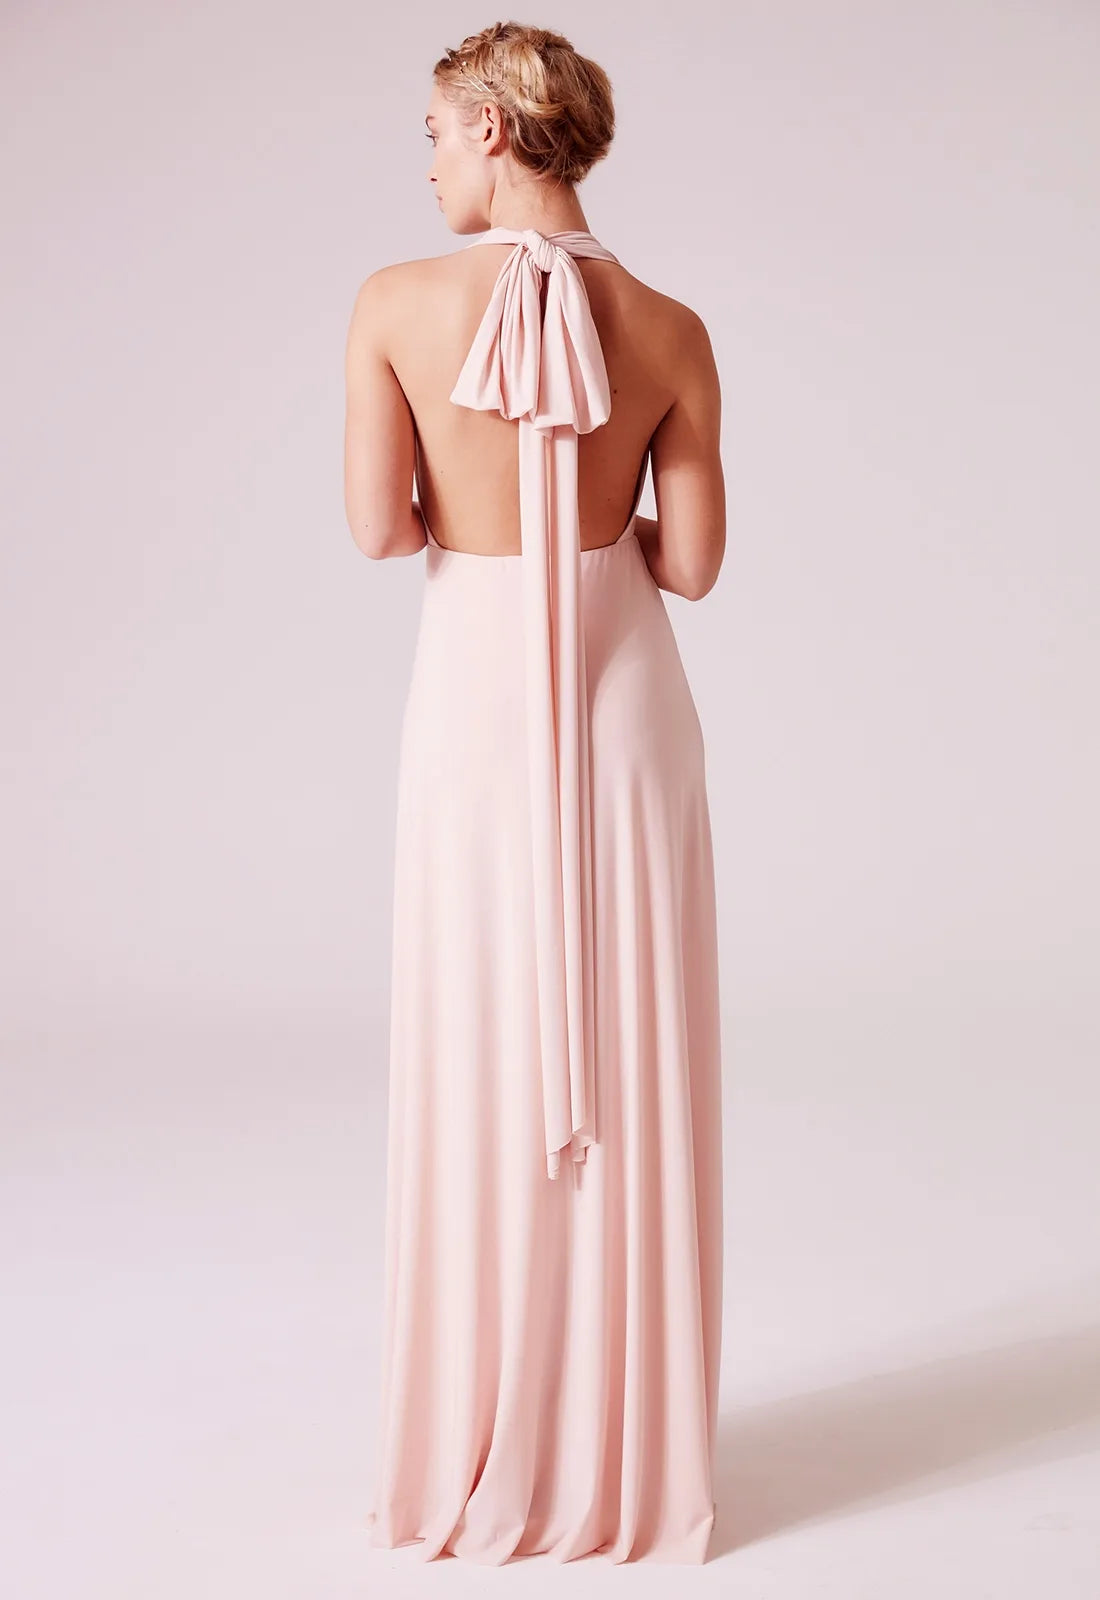 Revie Alexis Multiway Maxi Dress in Nude-13537